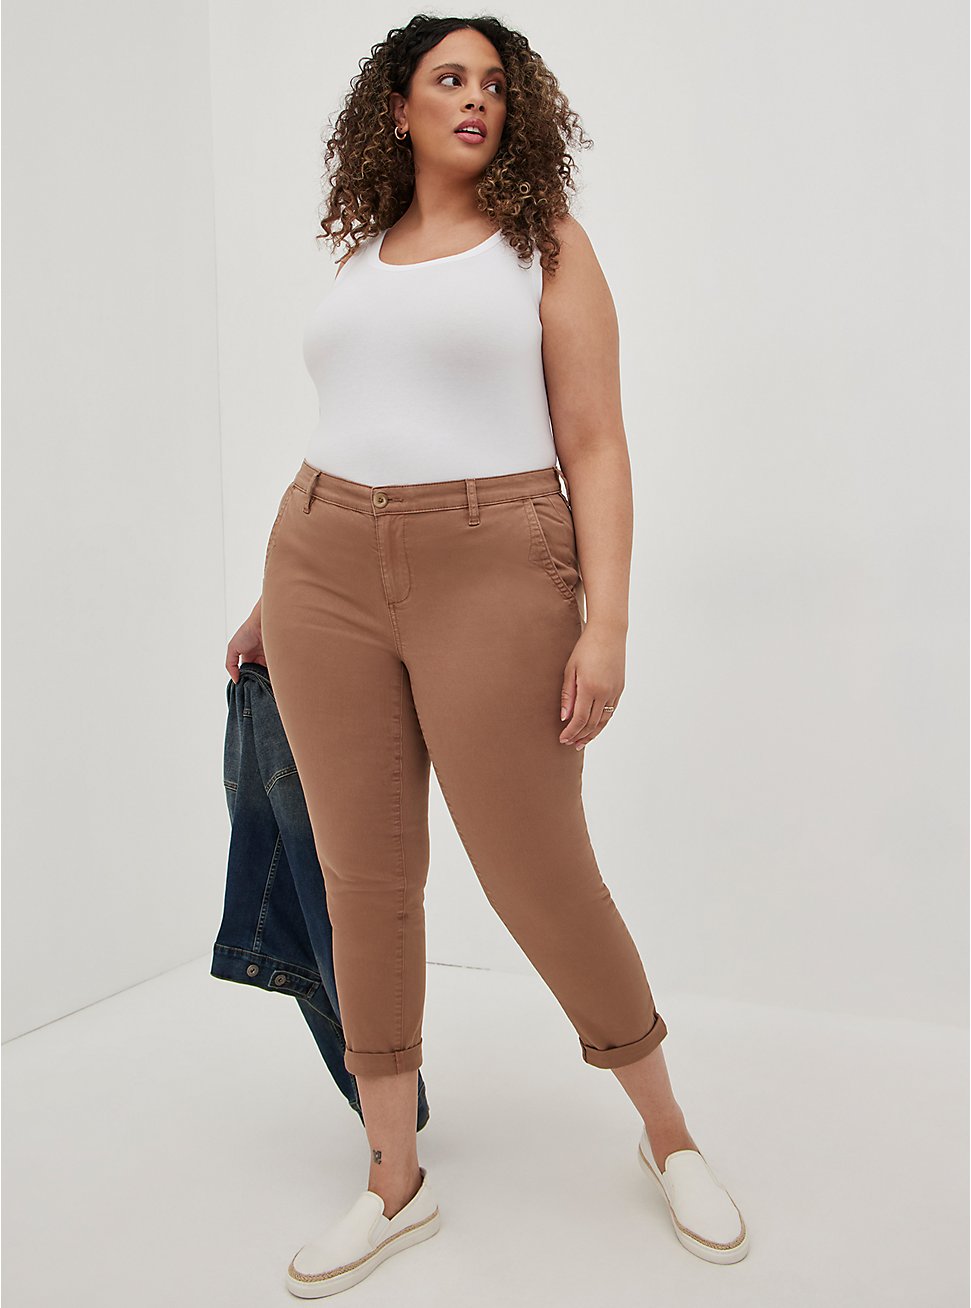 Crop Skinny Chino Stretch Twill Mid-Rise Pant, BROWN, hi-res